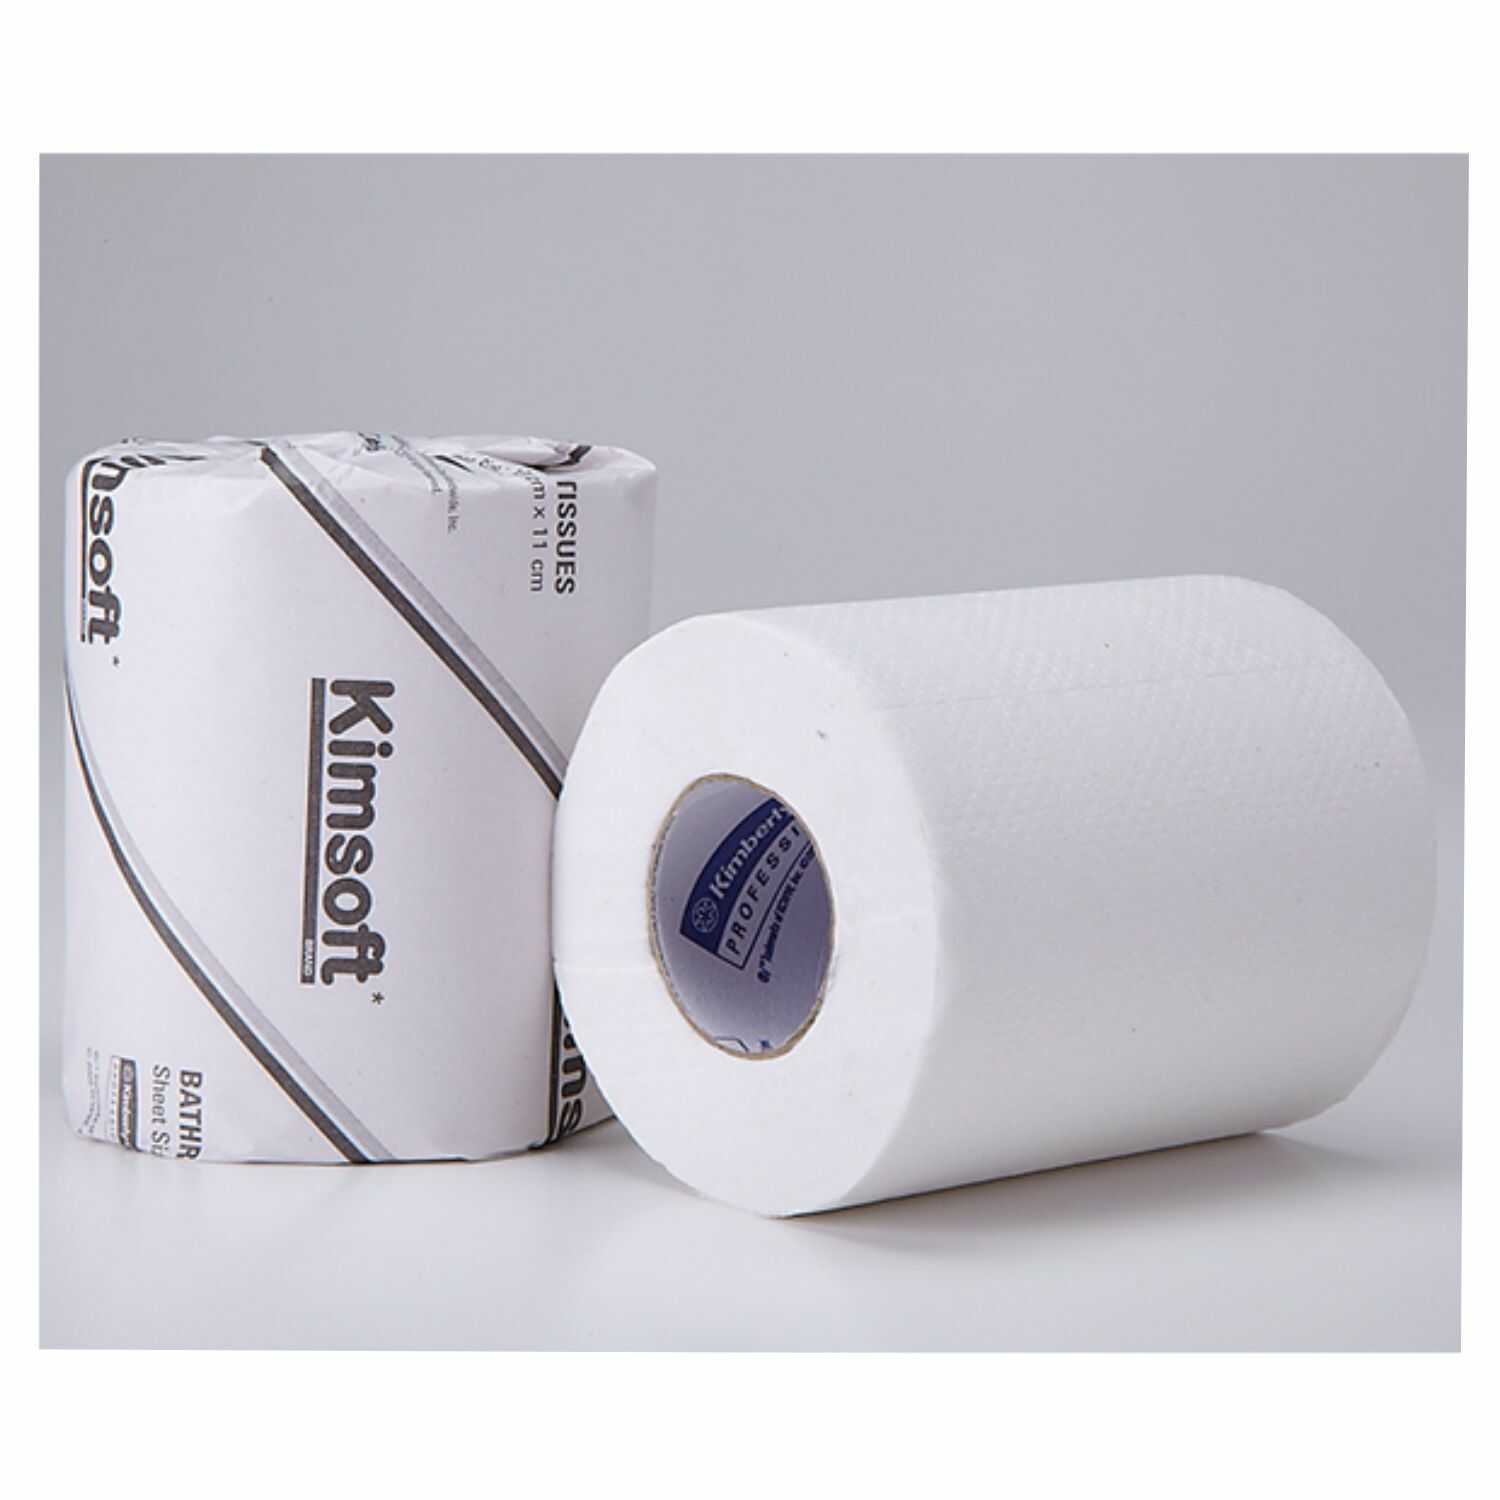 Kimberly Clark* Scott* Essential Bathroom Tissue Roll, 2Ply, 1276 (Pack of 200 Rolls/Case, 120 Sheets/Pack, Total 24,000 Sheets )